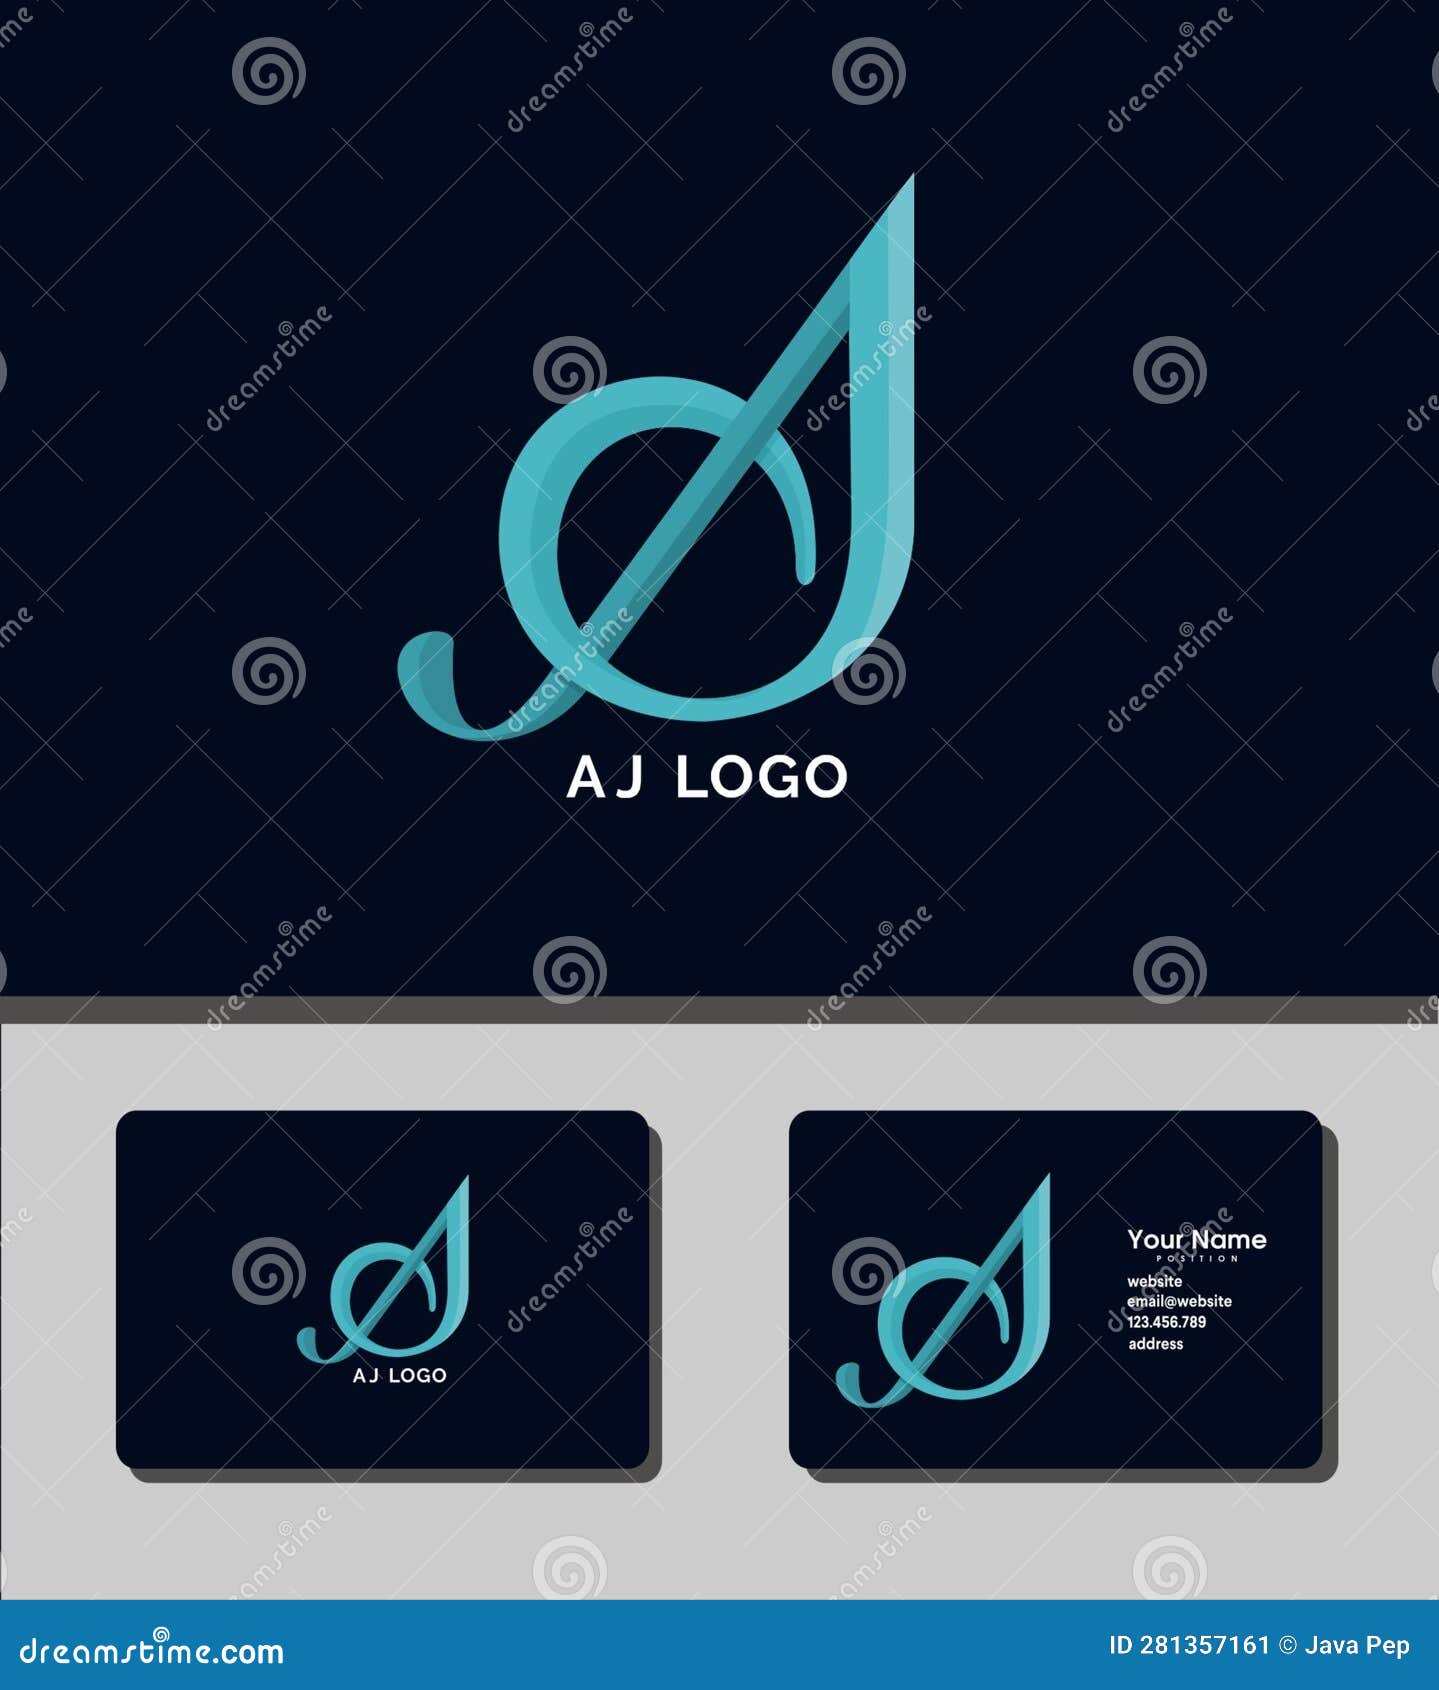 Outstanding Logo Template Design that Combines a and J Letters Stock ...